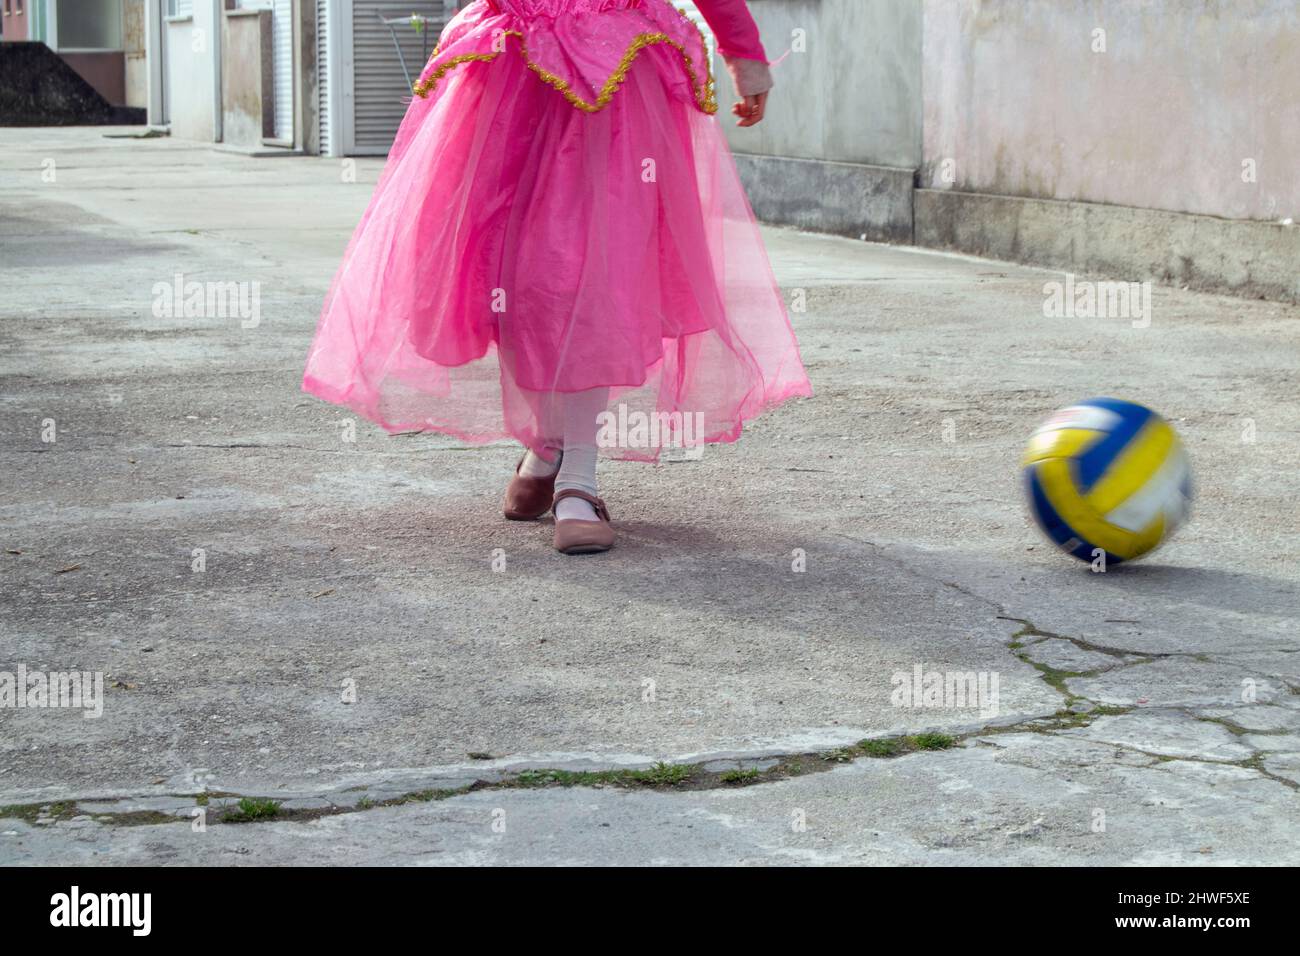 Little girl dressed like a princess playing with a ball. Girls and sports, girls education. Playing outdoor. Girls playing like boys. Stock Photo